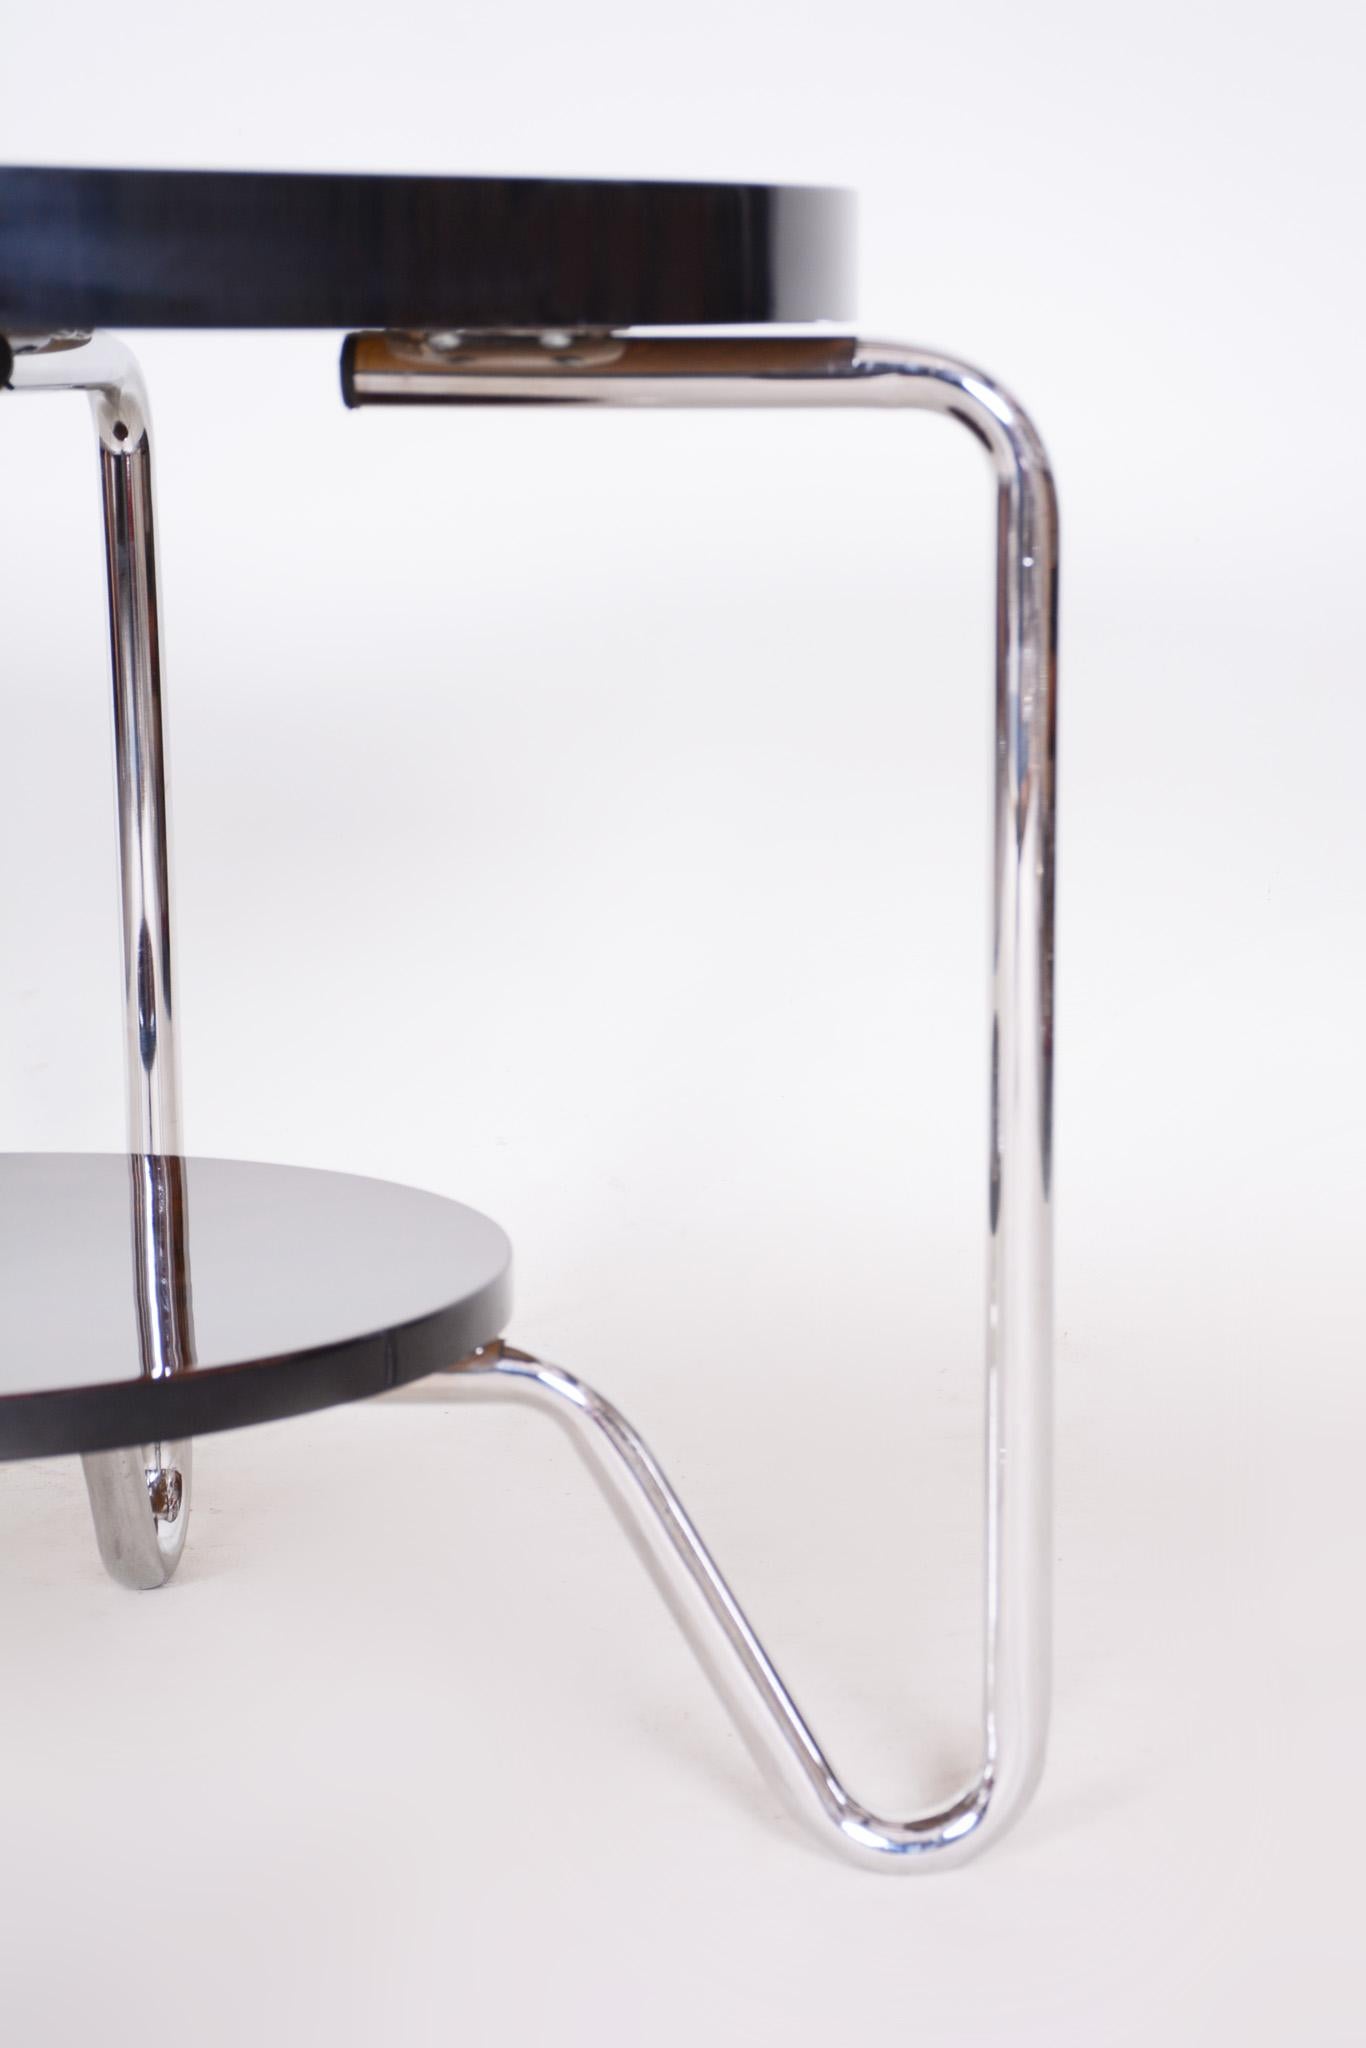 Unusual bauhaus table.
Completely professionally restored
Source: Czech
Maker: Kovona
Period: 1950-1959
Material: Chrome and lacquered wood.